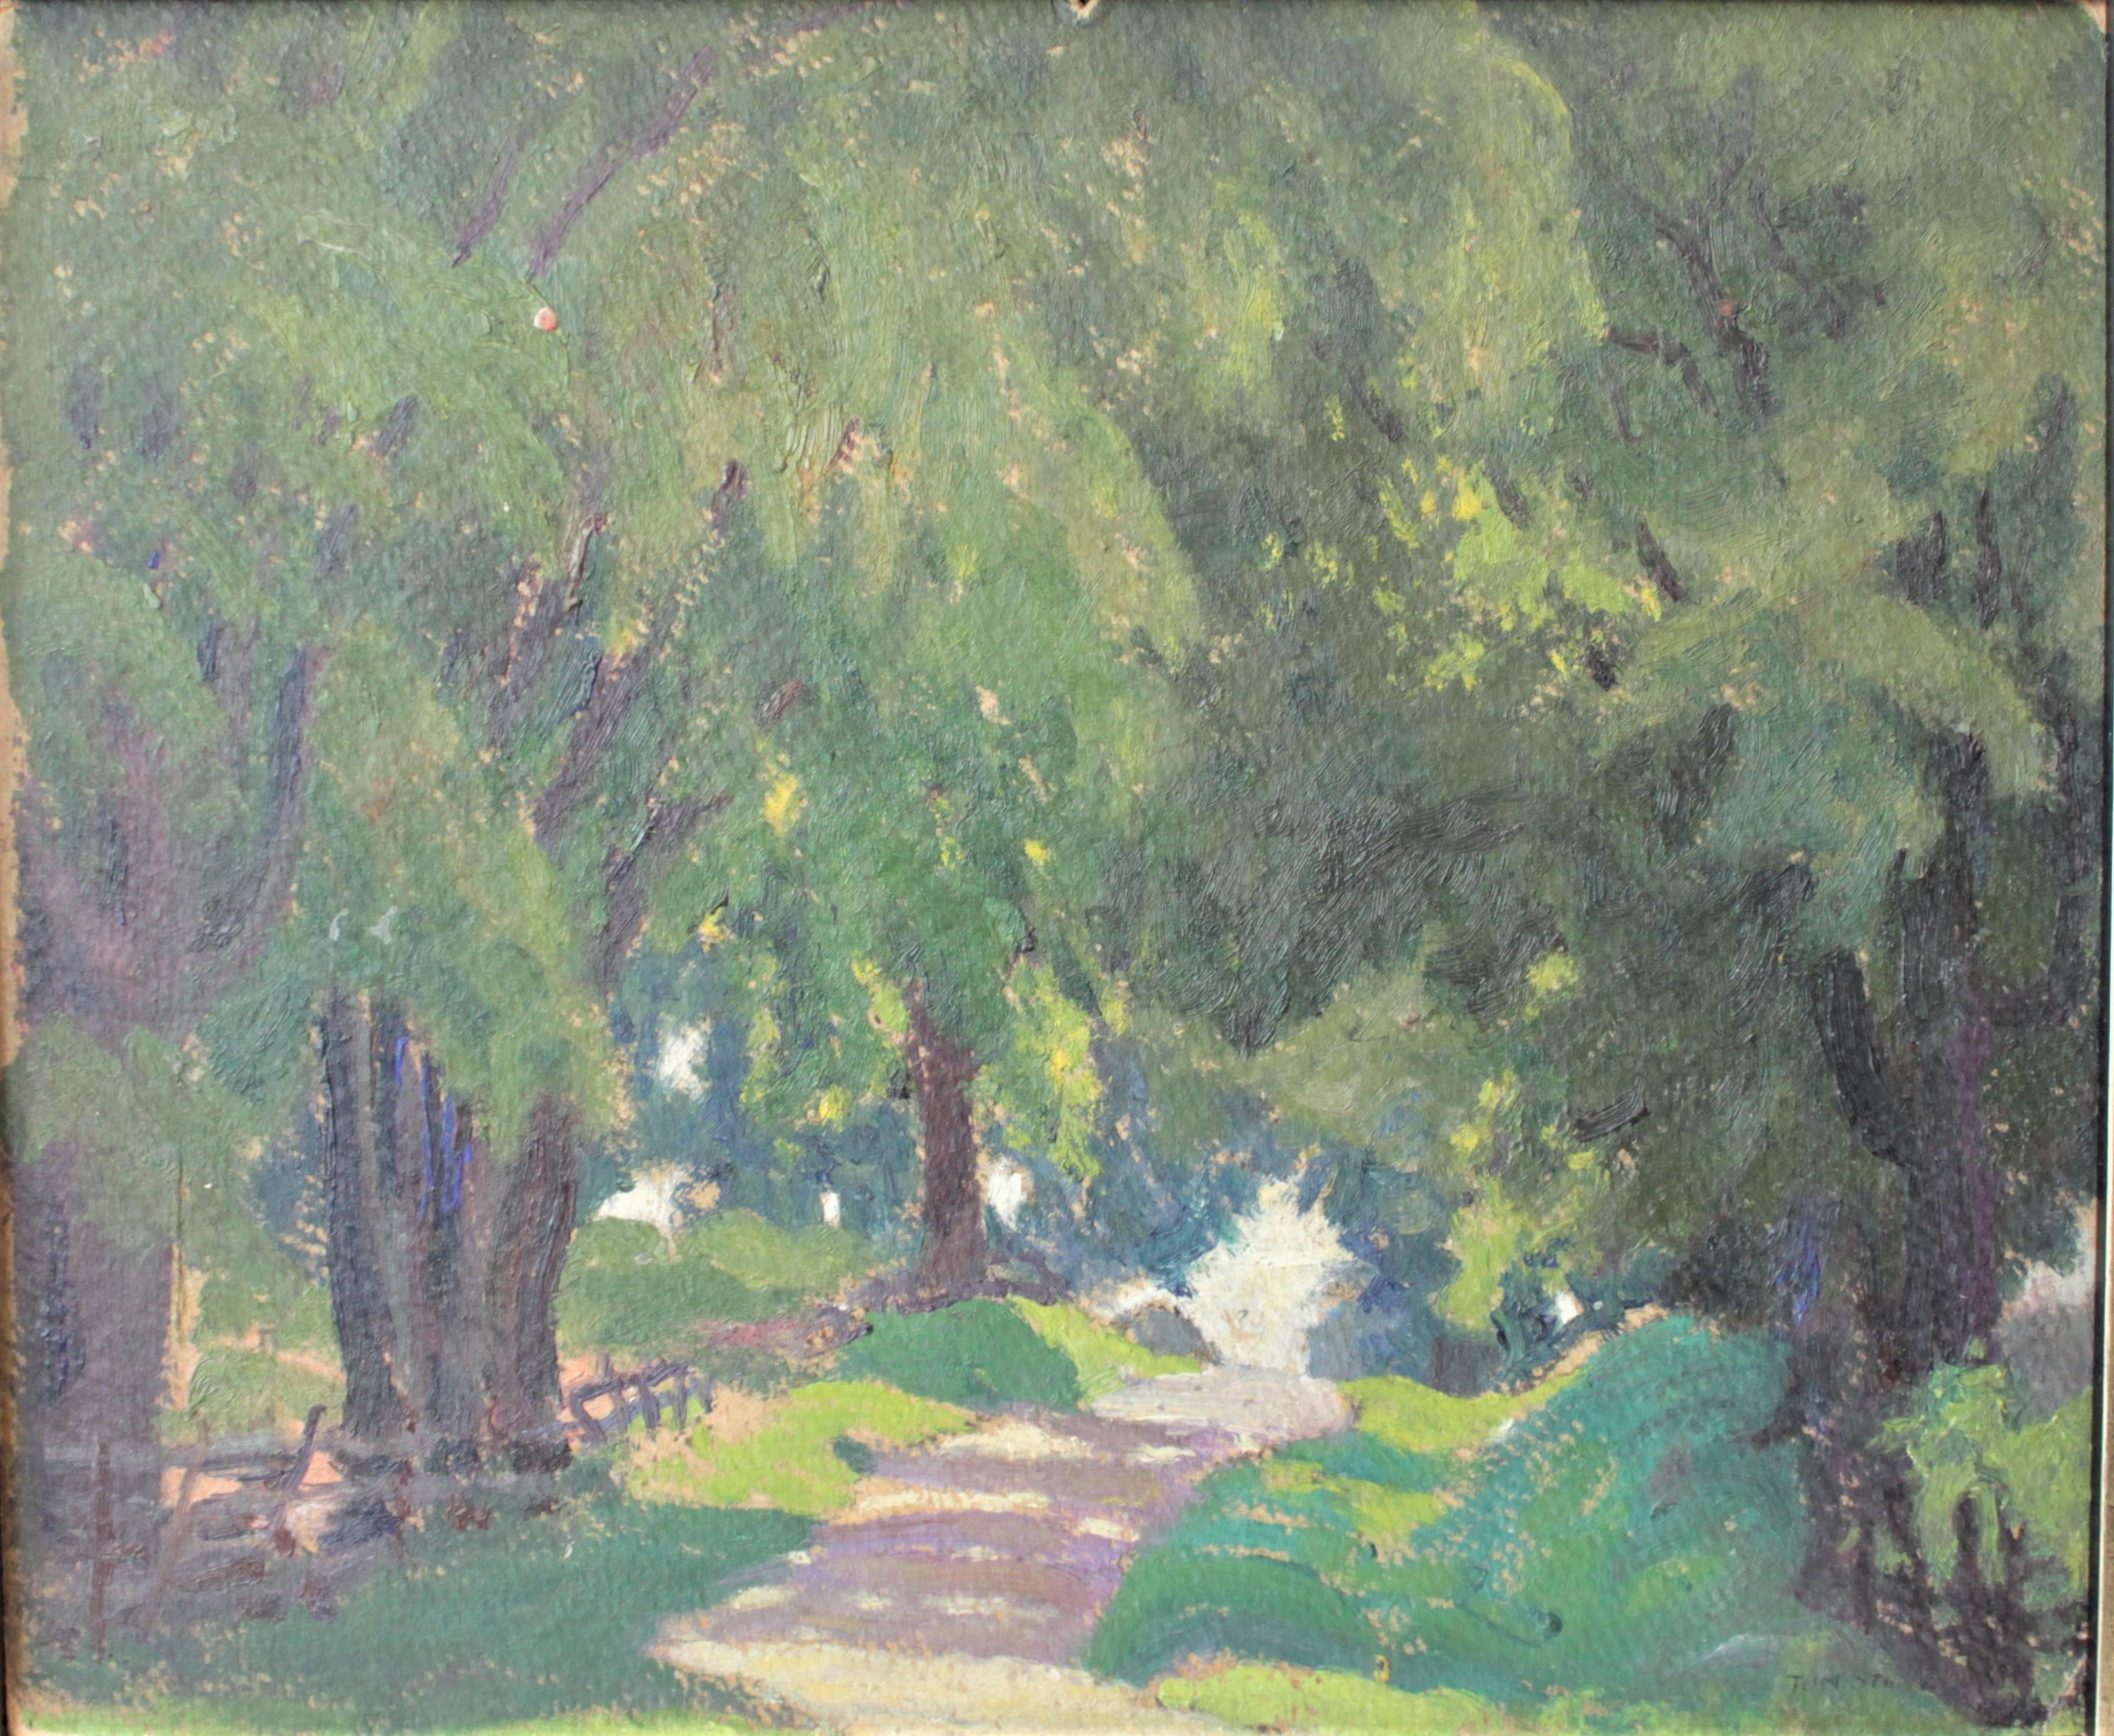 This original oil painting on board was done by renowned Canadian artist Tom Stone. The painting depicts a rural laneway amidst a lush canopy of trees and is done is an impressionistic style in various shades of green. This painting does have a